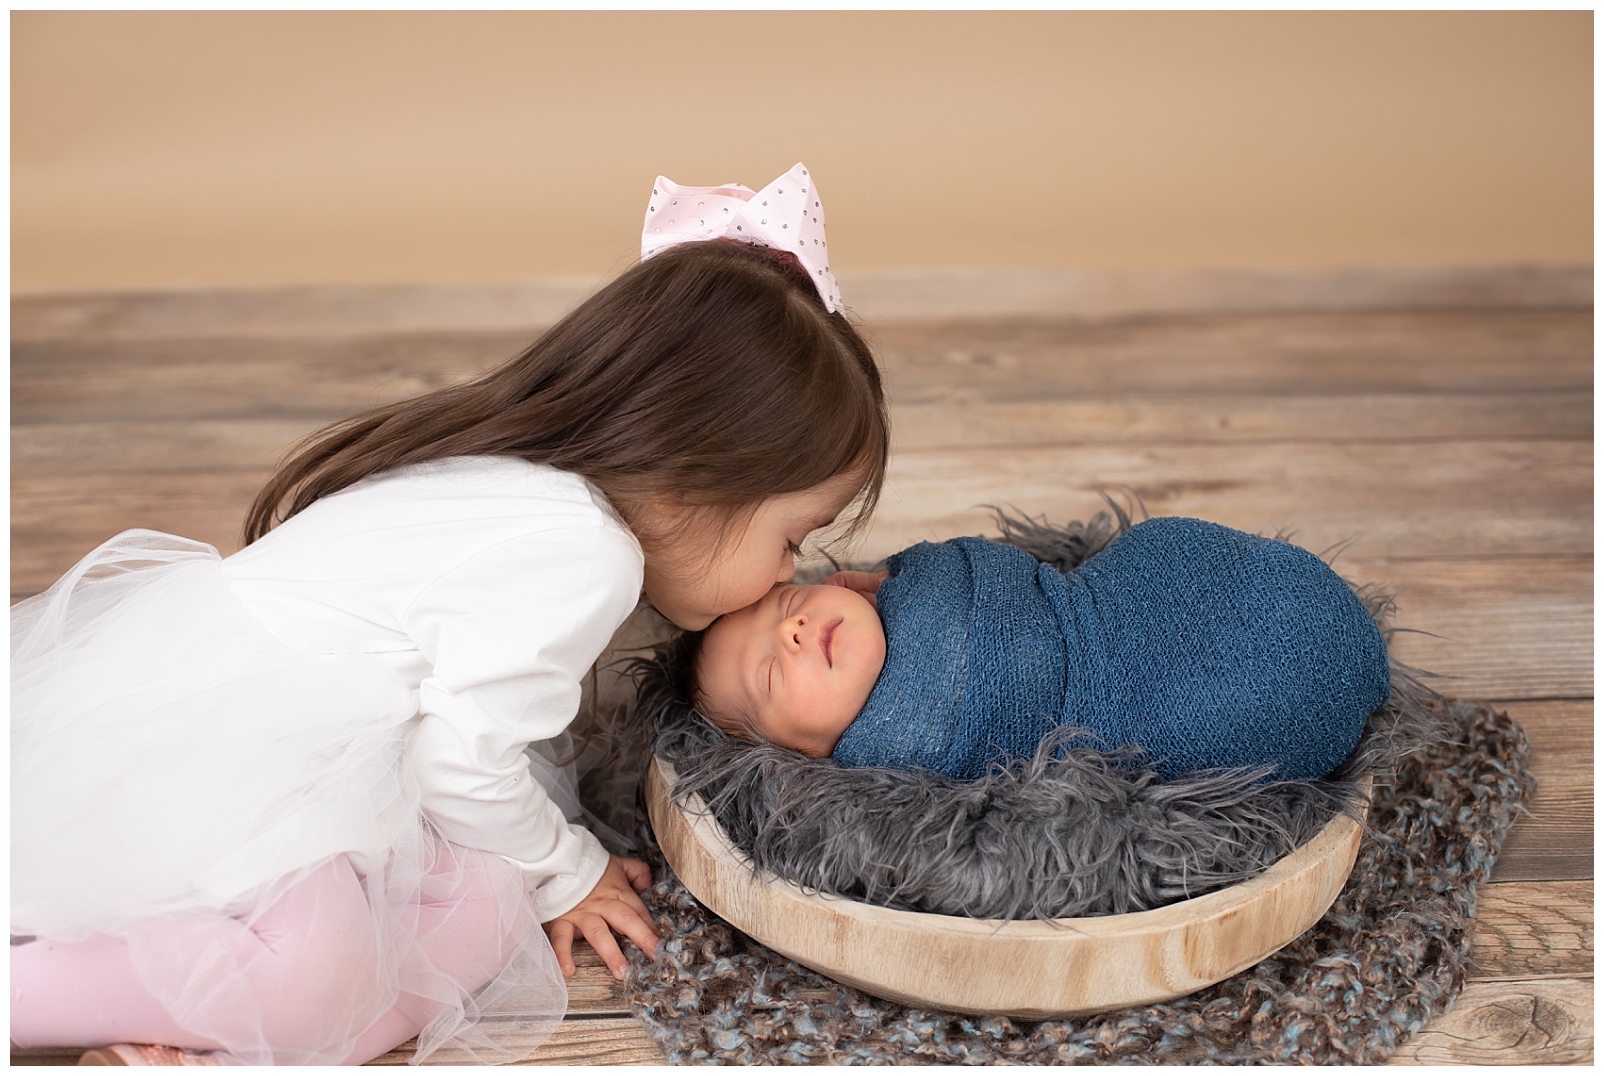 sister in pink dress kissing newborn boy on the forehead